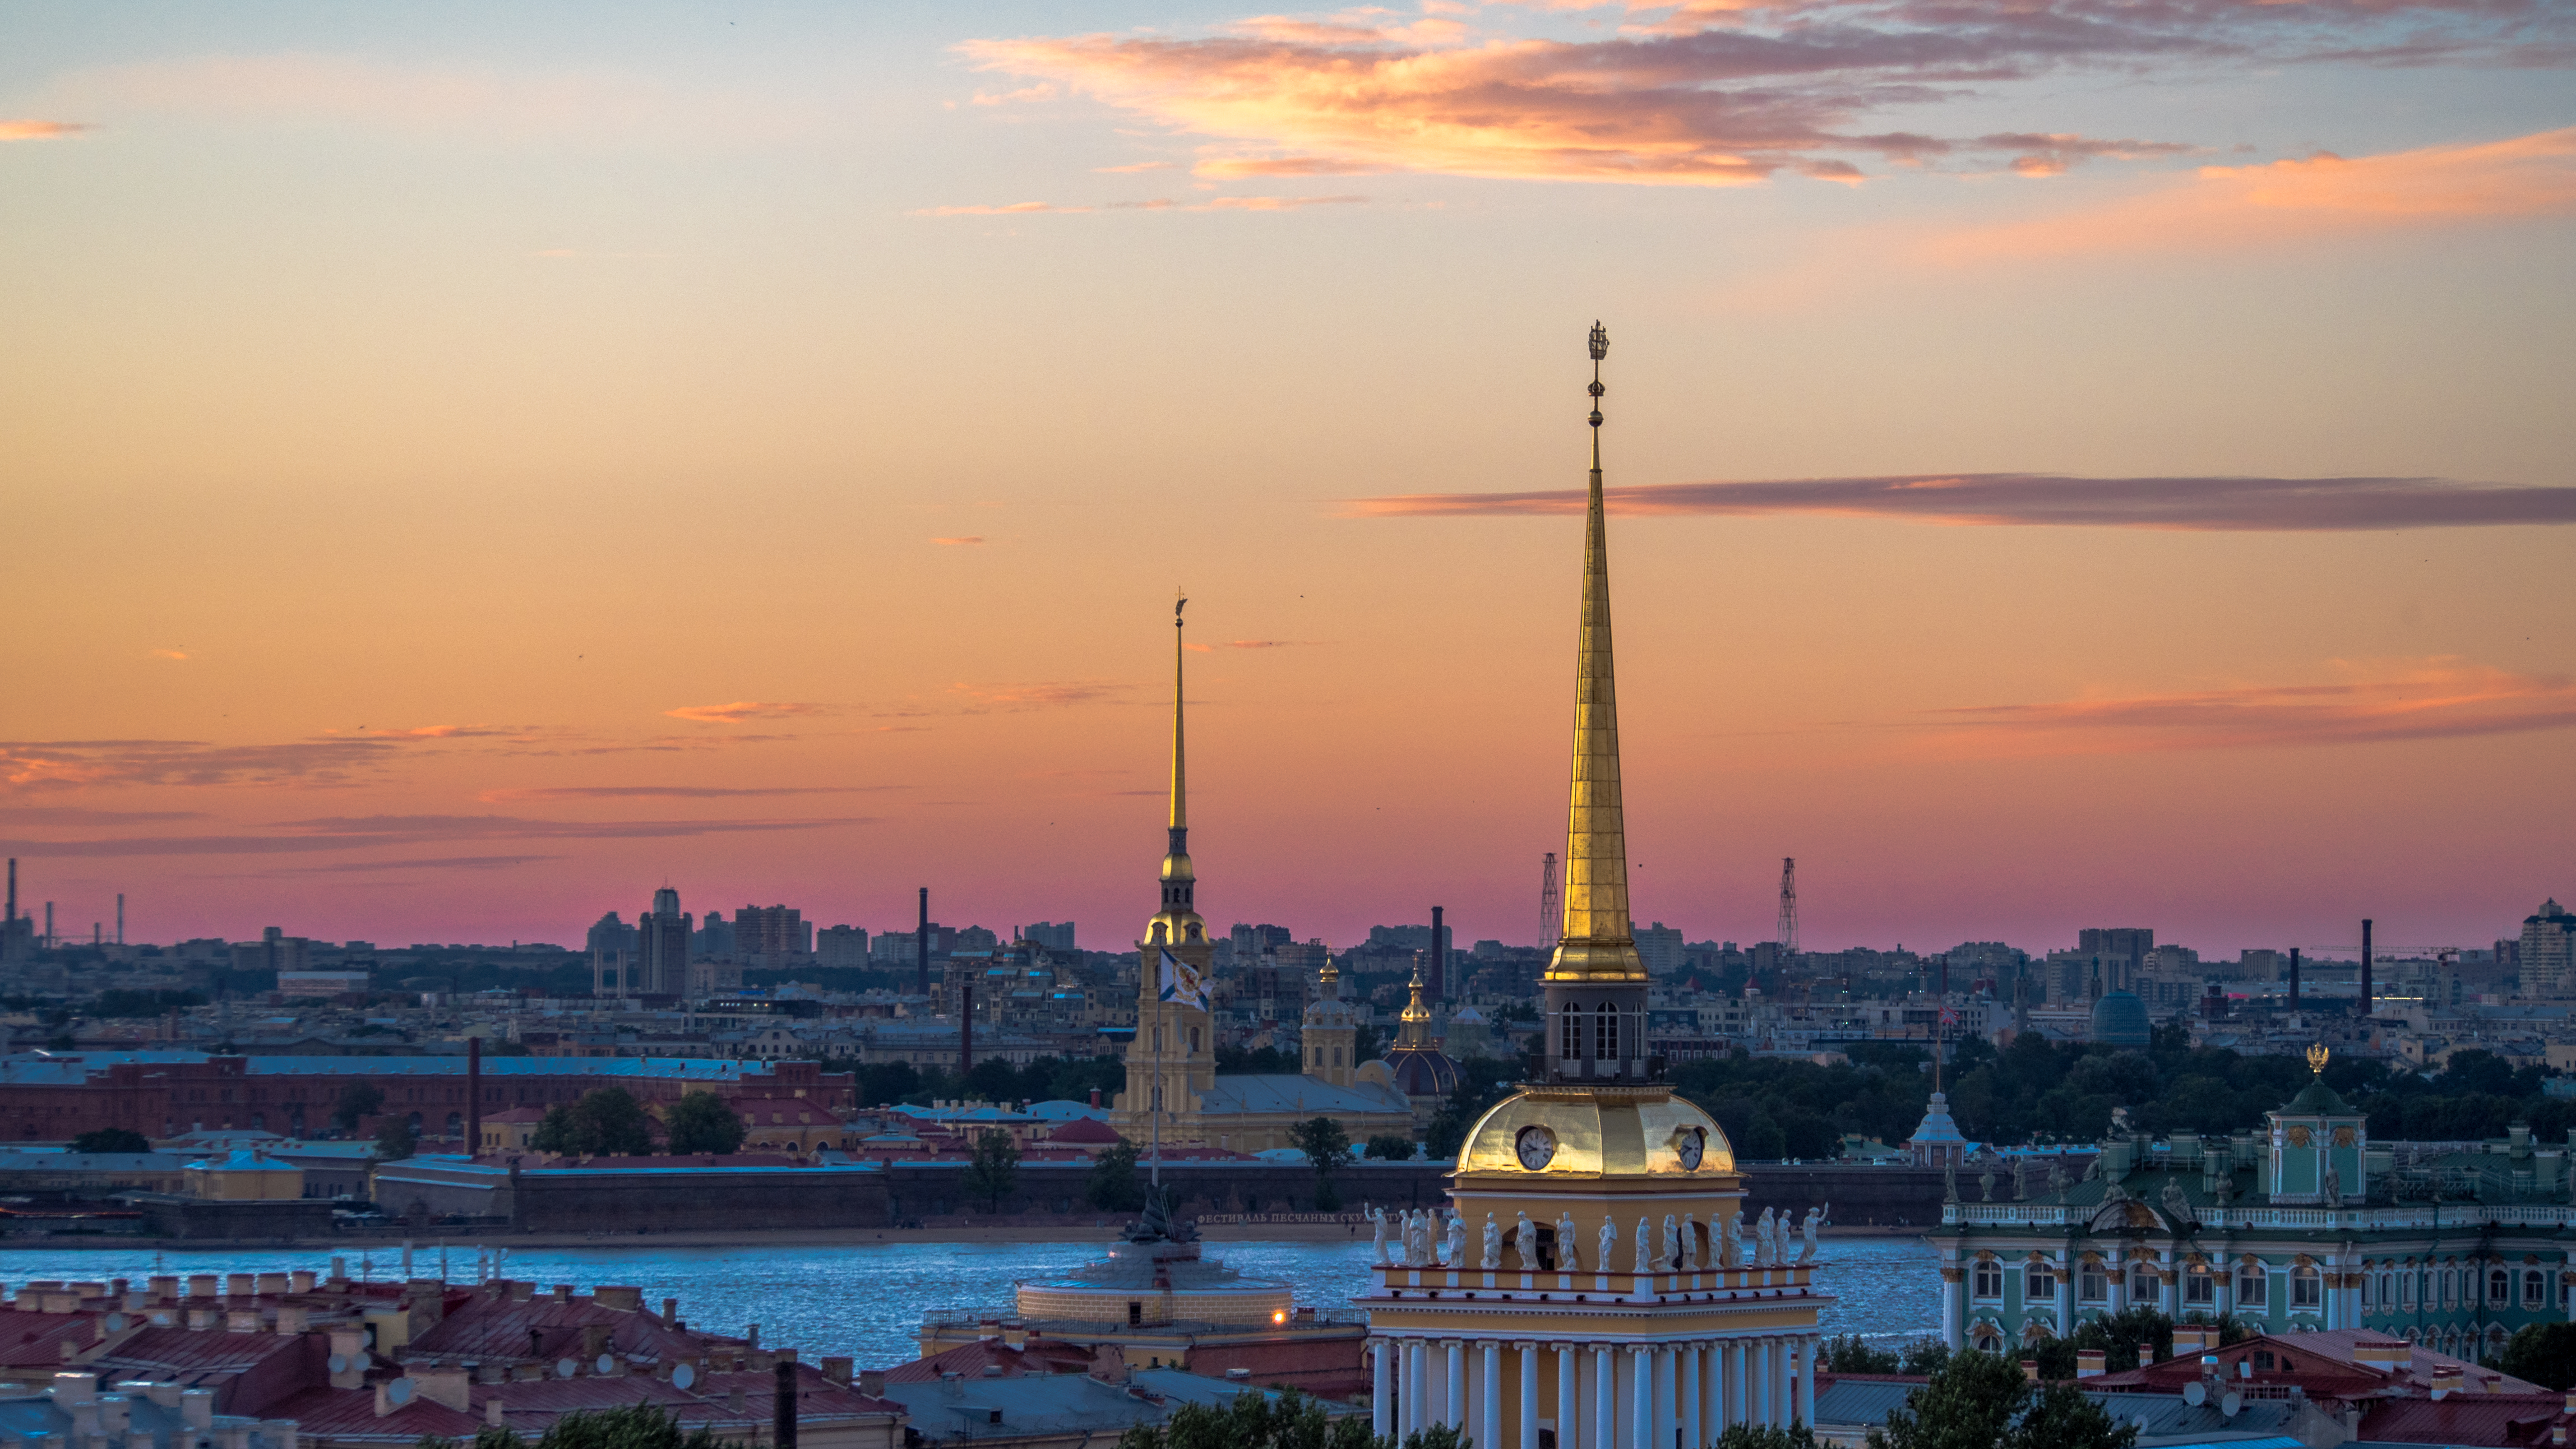 man made, saint petersburg, architecture, city, river, russia, sky, sunset, cities